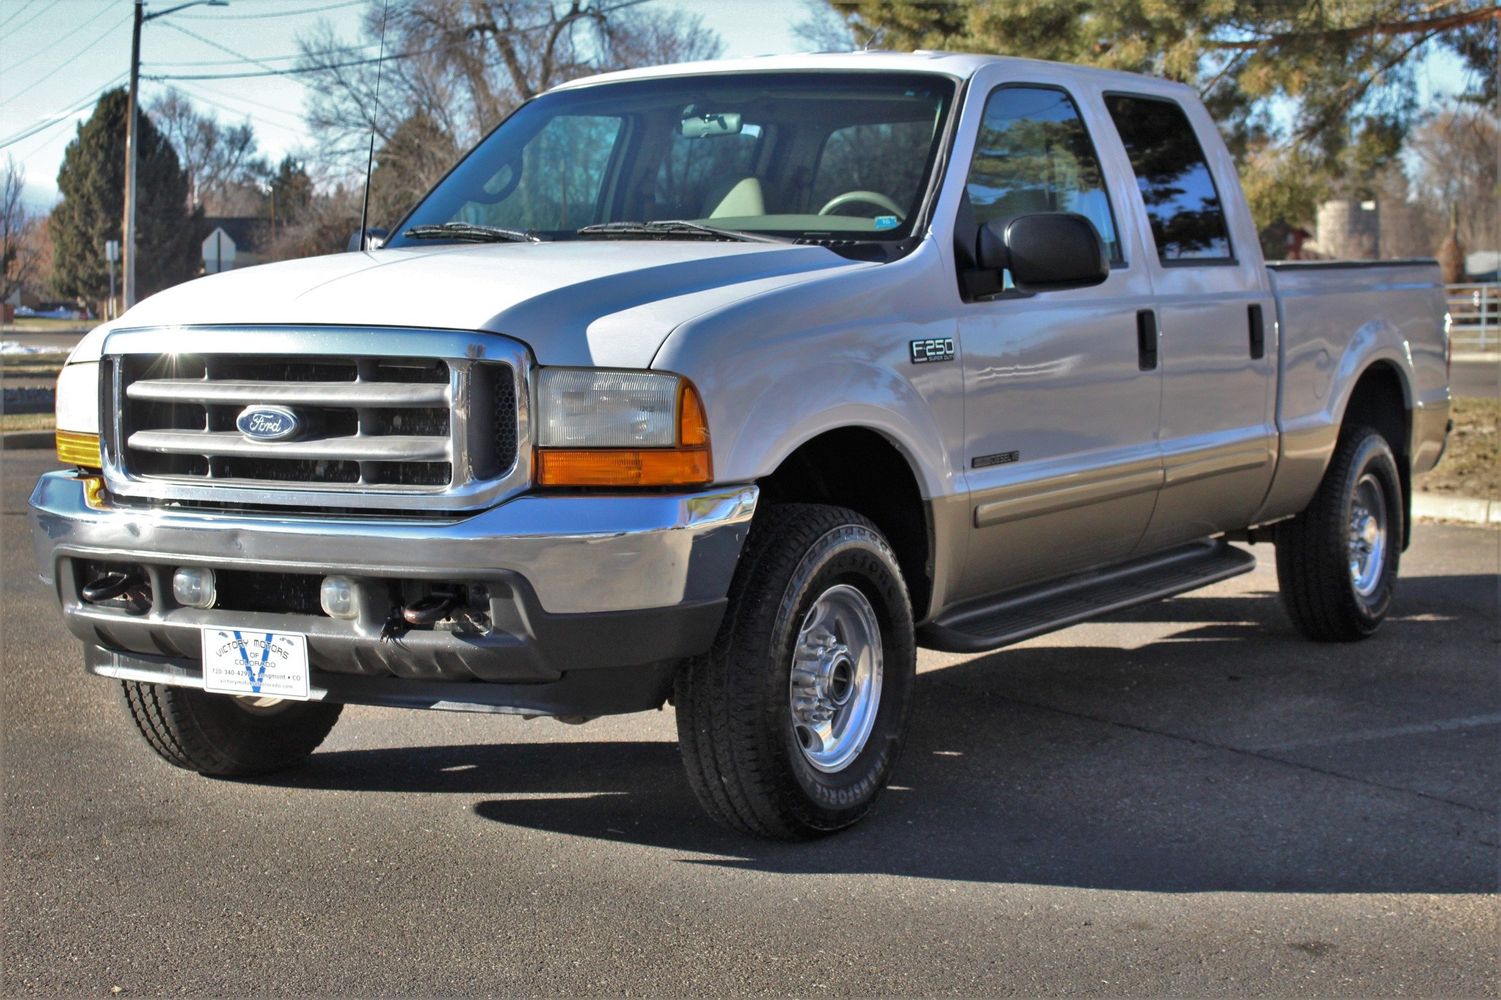 2001 Ford F250 Super Duty 5.4 Towing Capacity